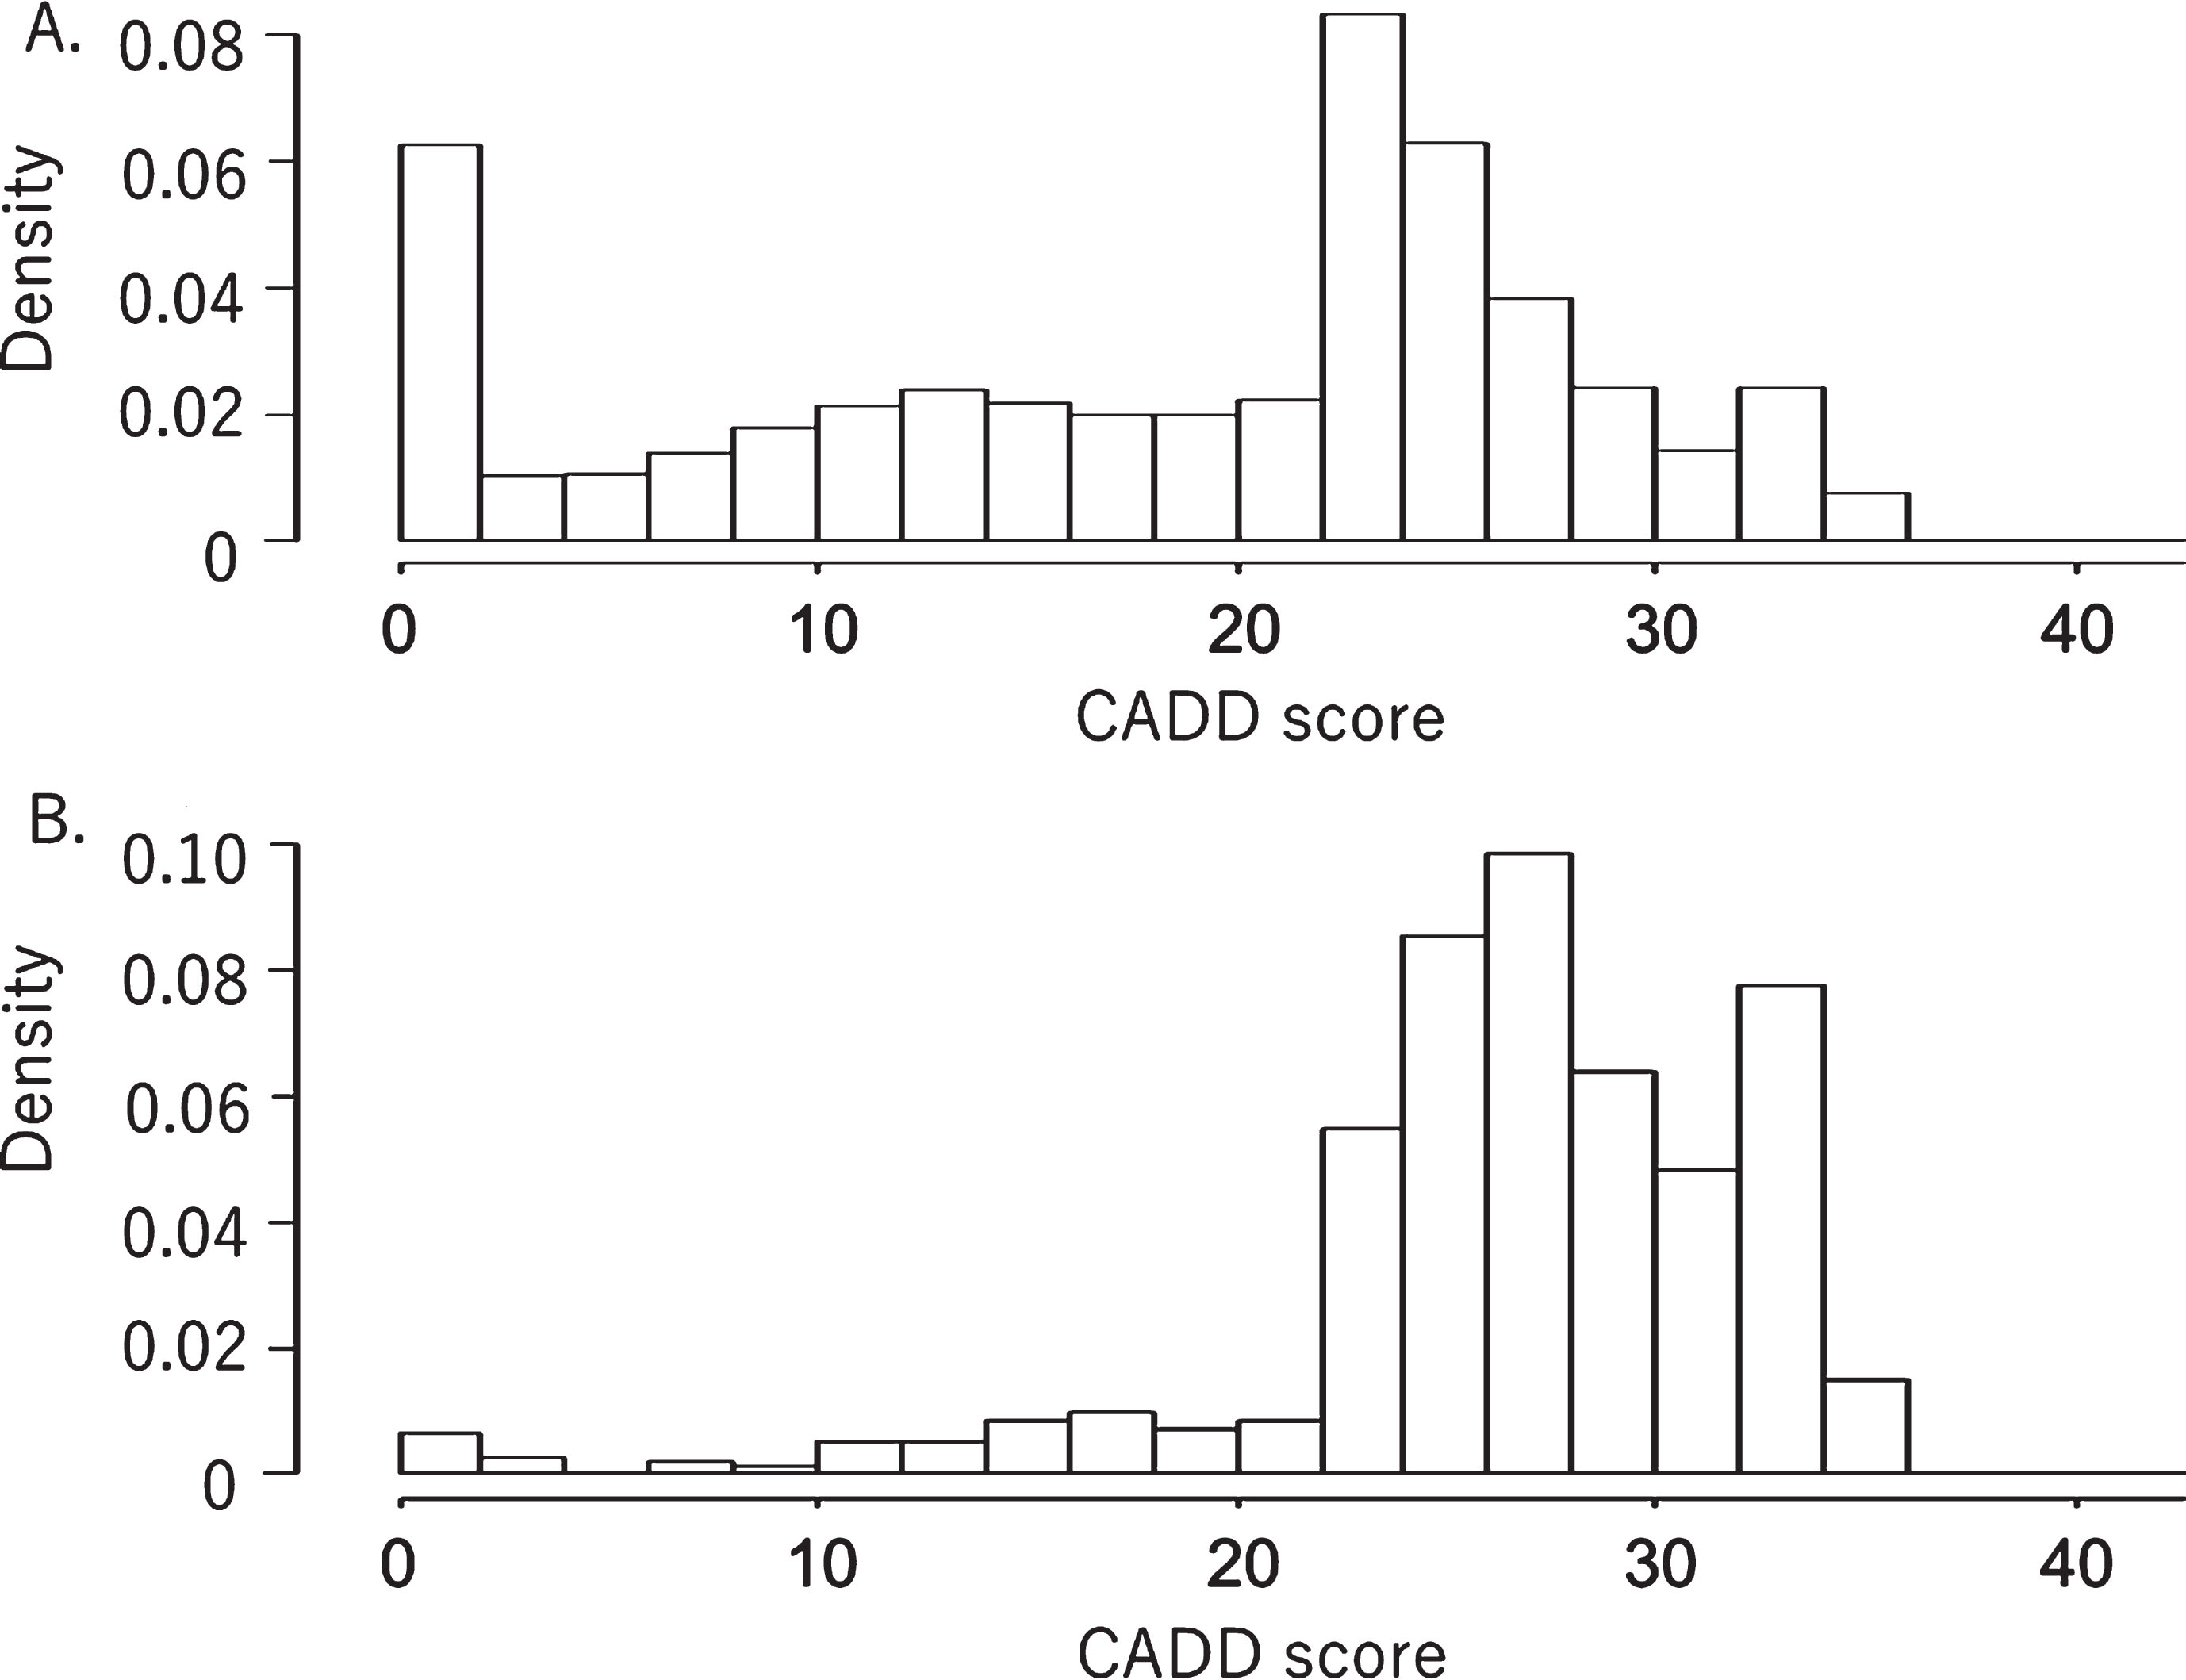 Distributions of CADD scores for non-synonymous variants in a normal Japanese population database (A) and a database of pathogenic variants (B). Both graphs have been standardized to show the same integral value of frequency.